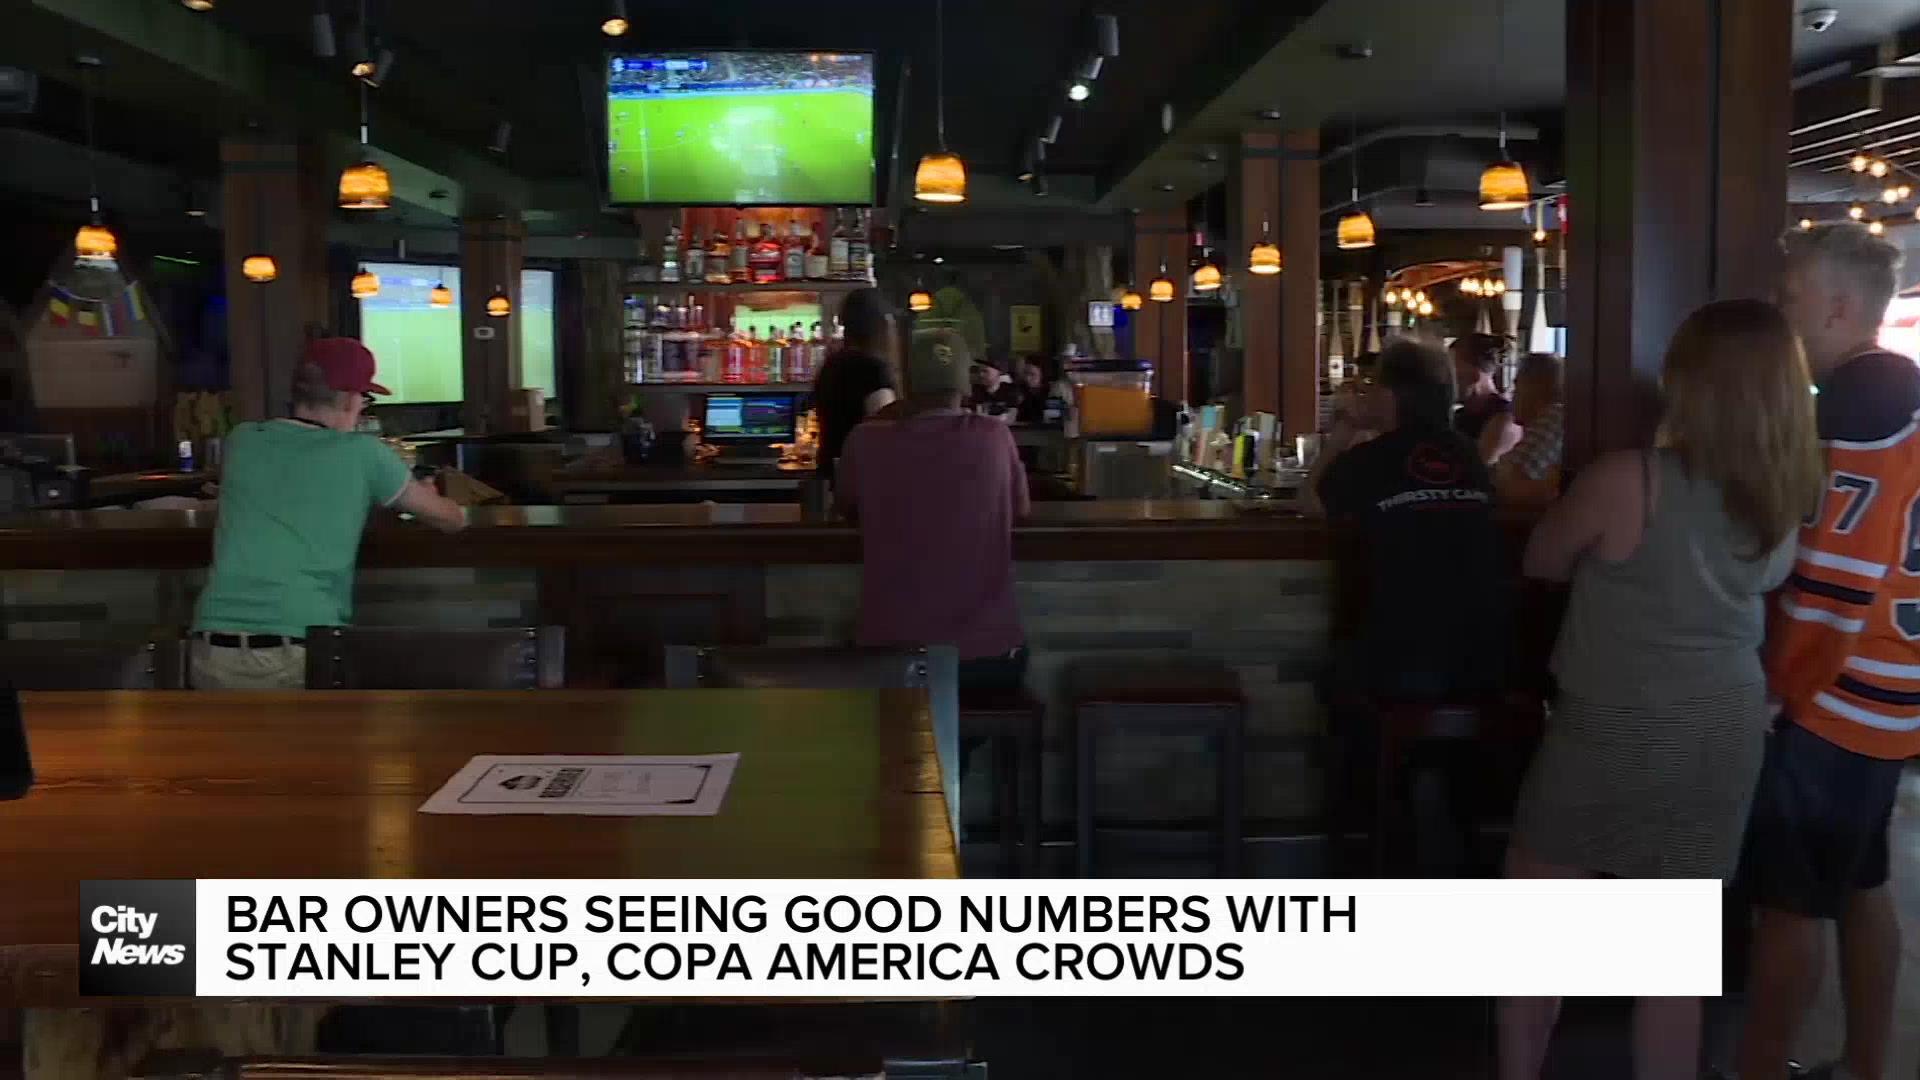 Bar owners seeing good numbers with Stanley Cup, Copa America